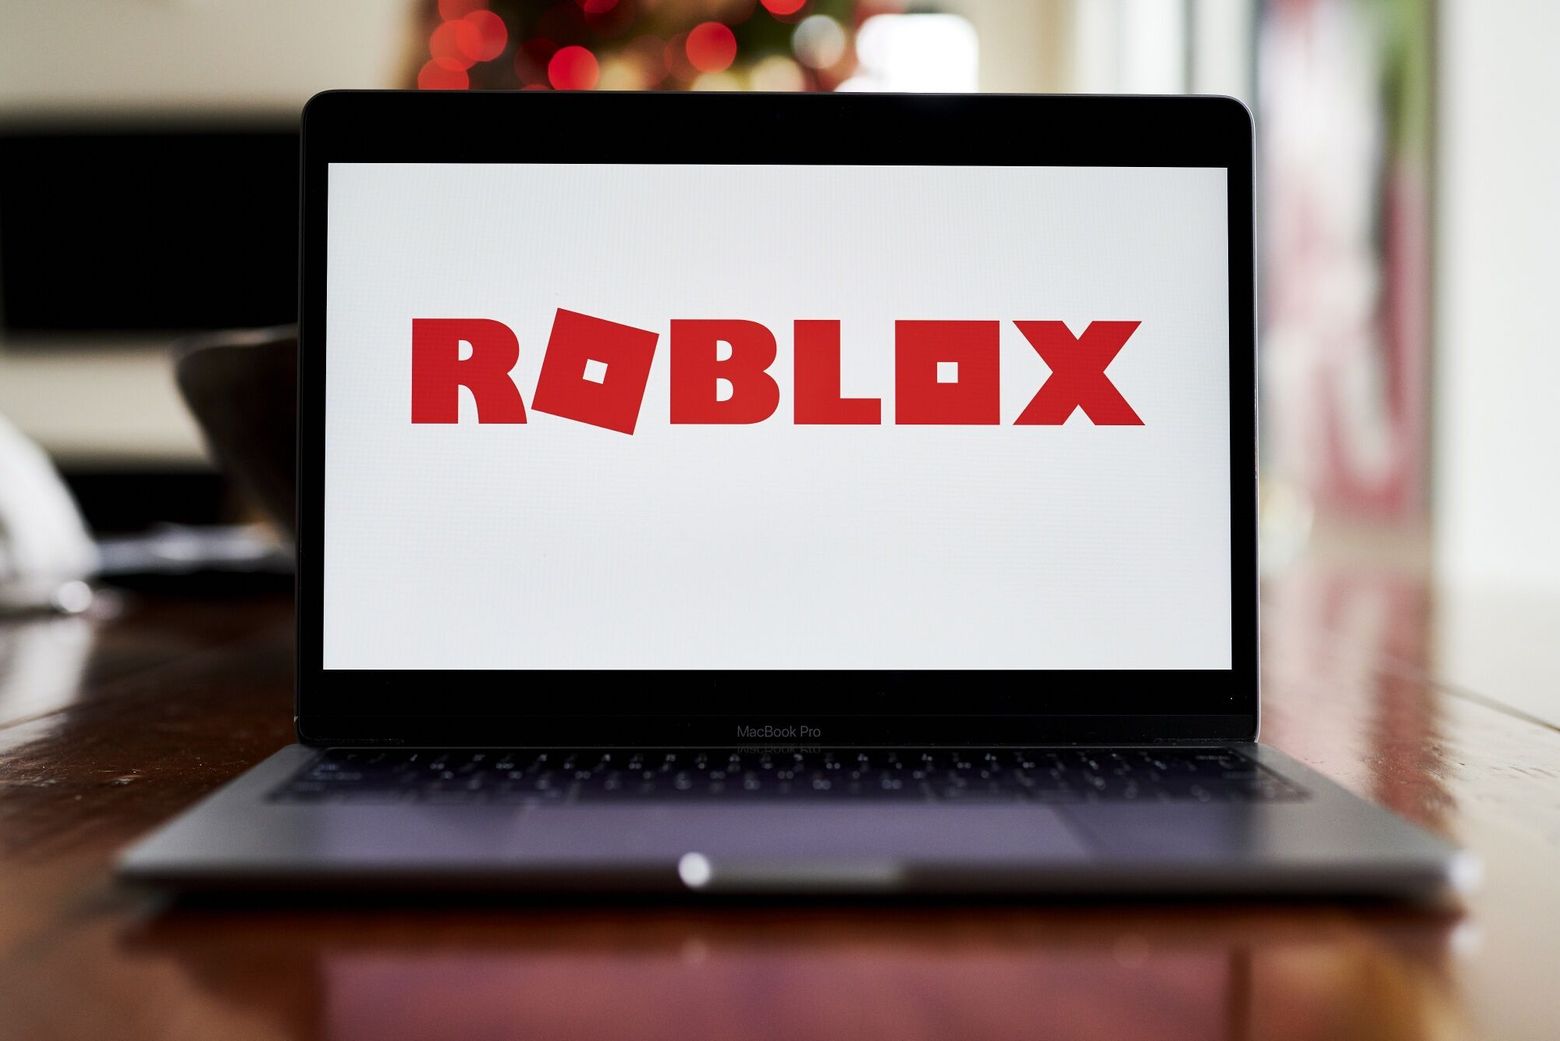 I finally play that survey thing on roblox